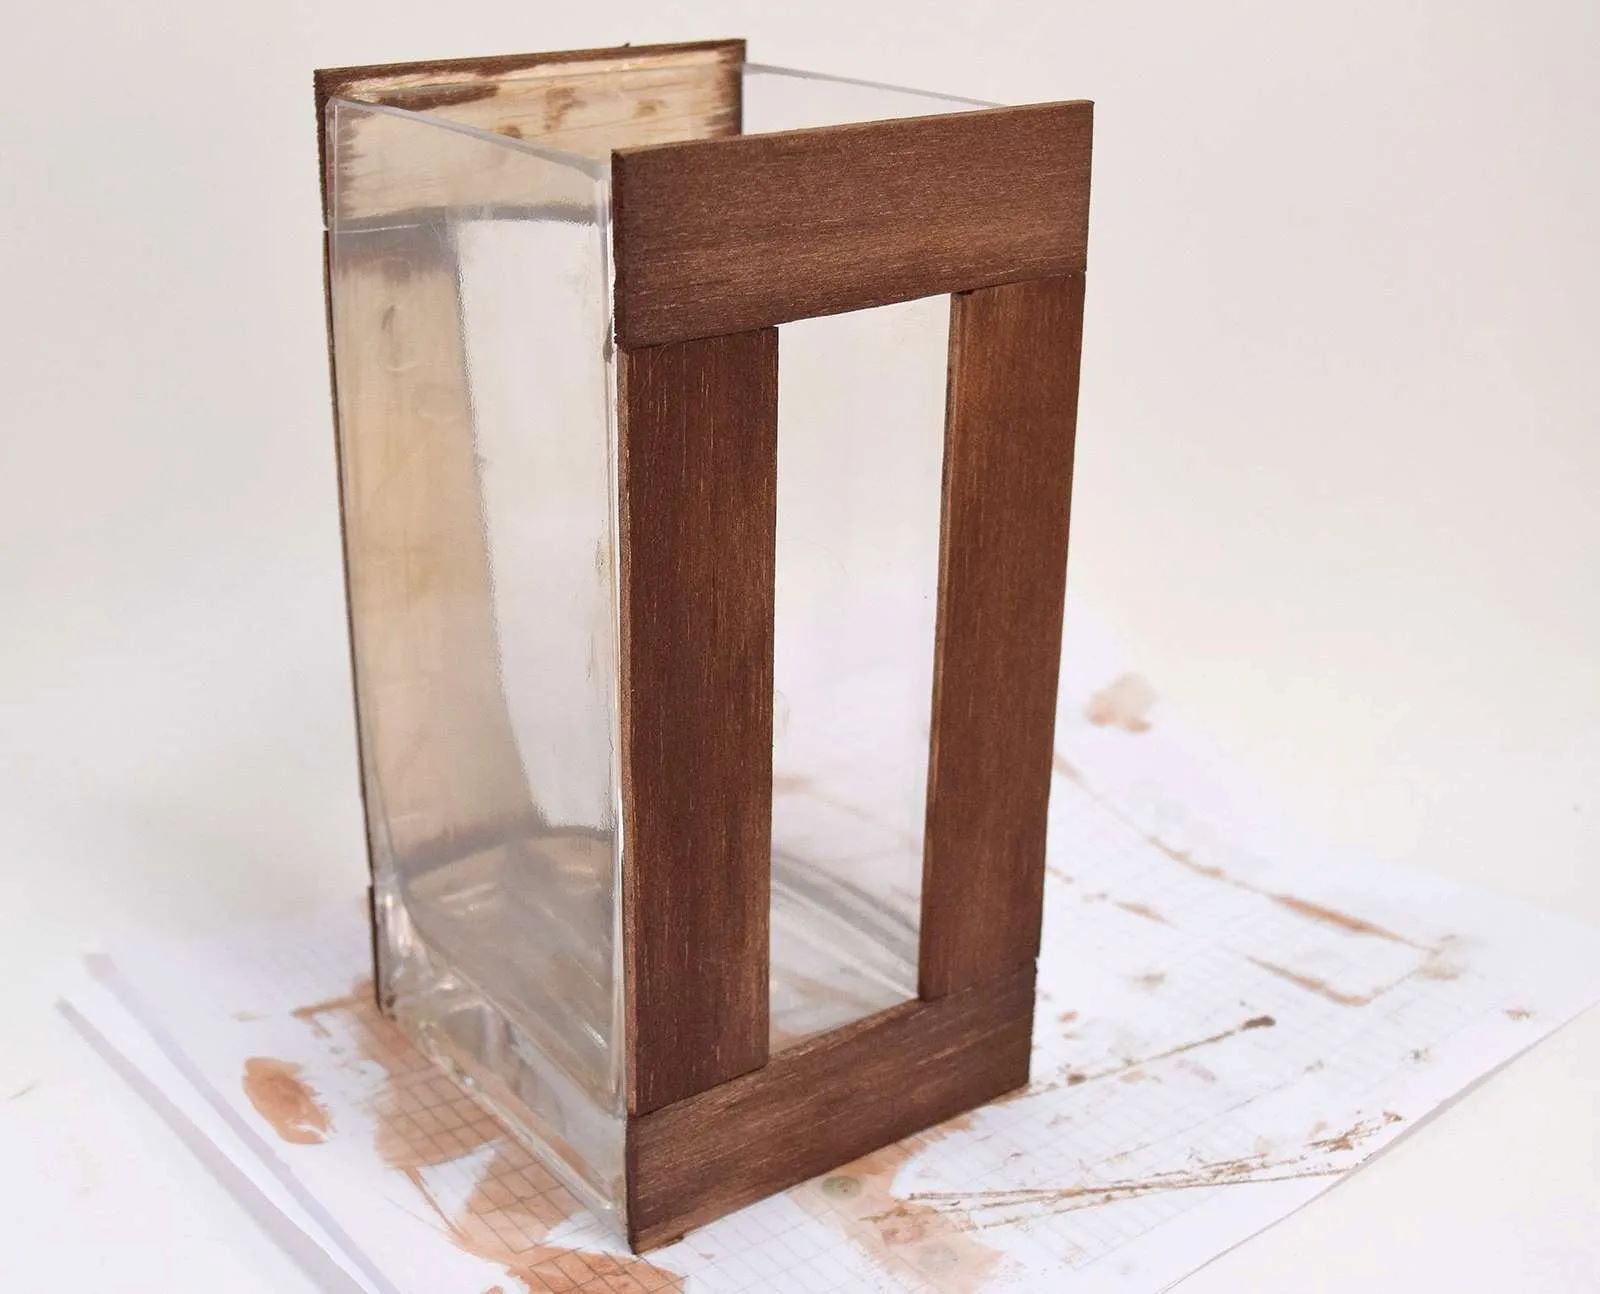 How To Glue Glass To Wood